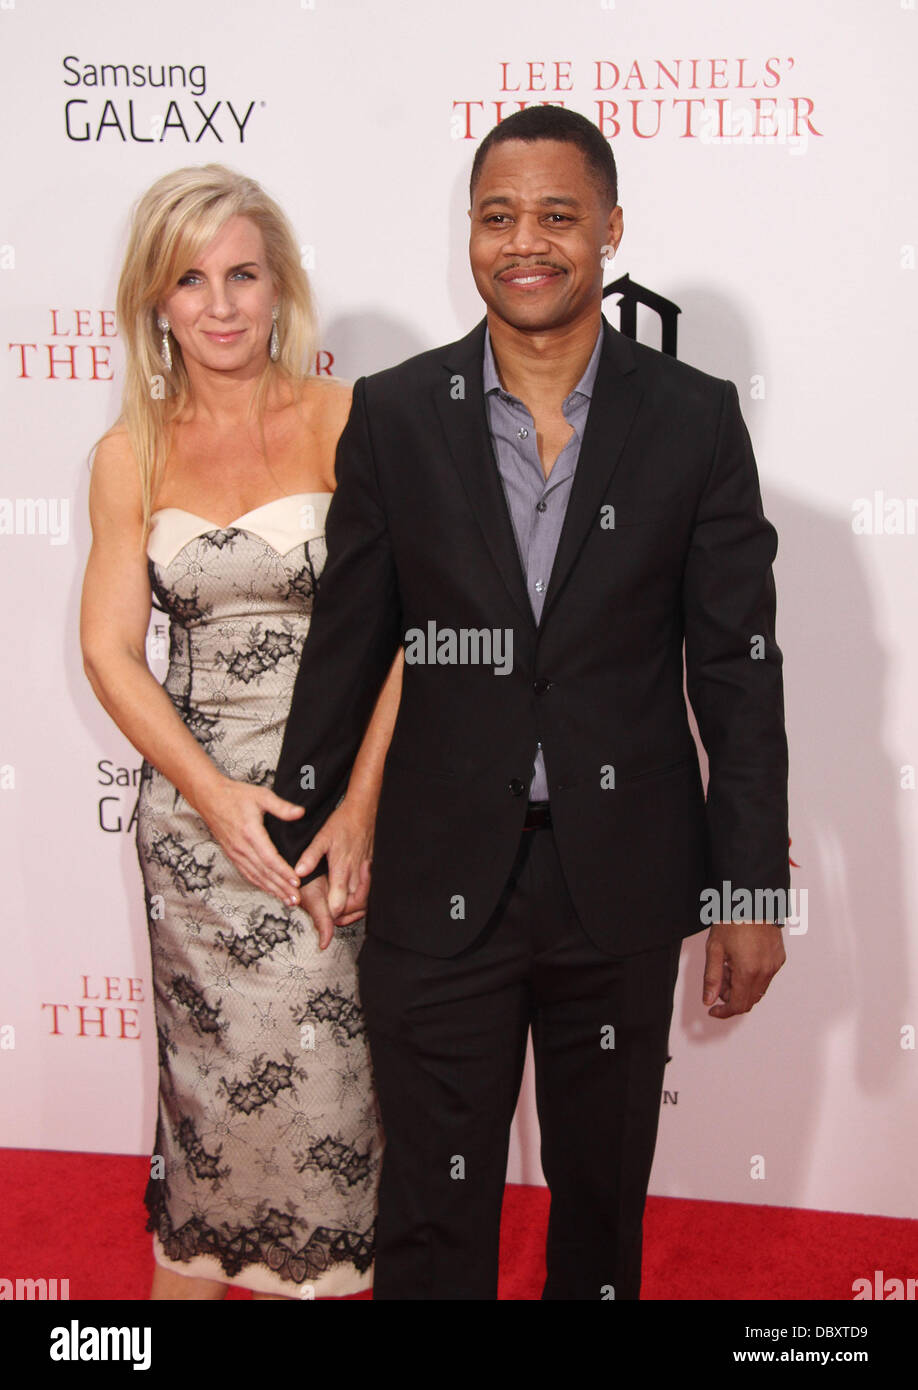 New York, NY, USA. 5th Aug, 2013.  - Actor CUBA GOODING JR. and his wife SARA KAPFER attend the New York premiere of 'Lee Daniels' The Butler' held at the Ziegfeld Theatre. © Nancy Kaszerman/ZUMAPRESS.com/Alamy Live News Stock Photo